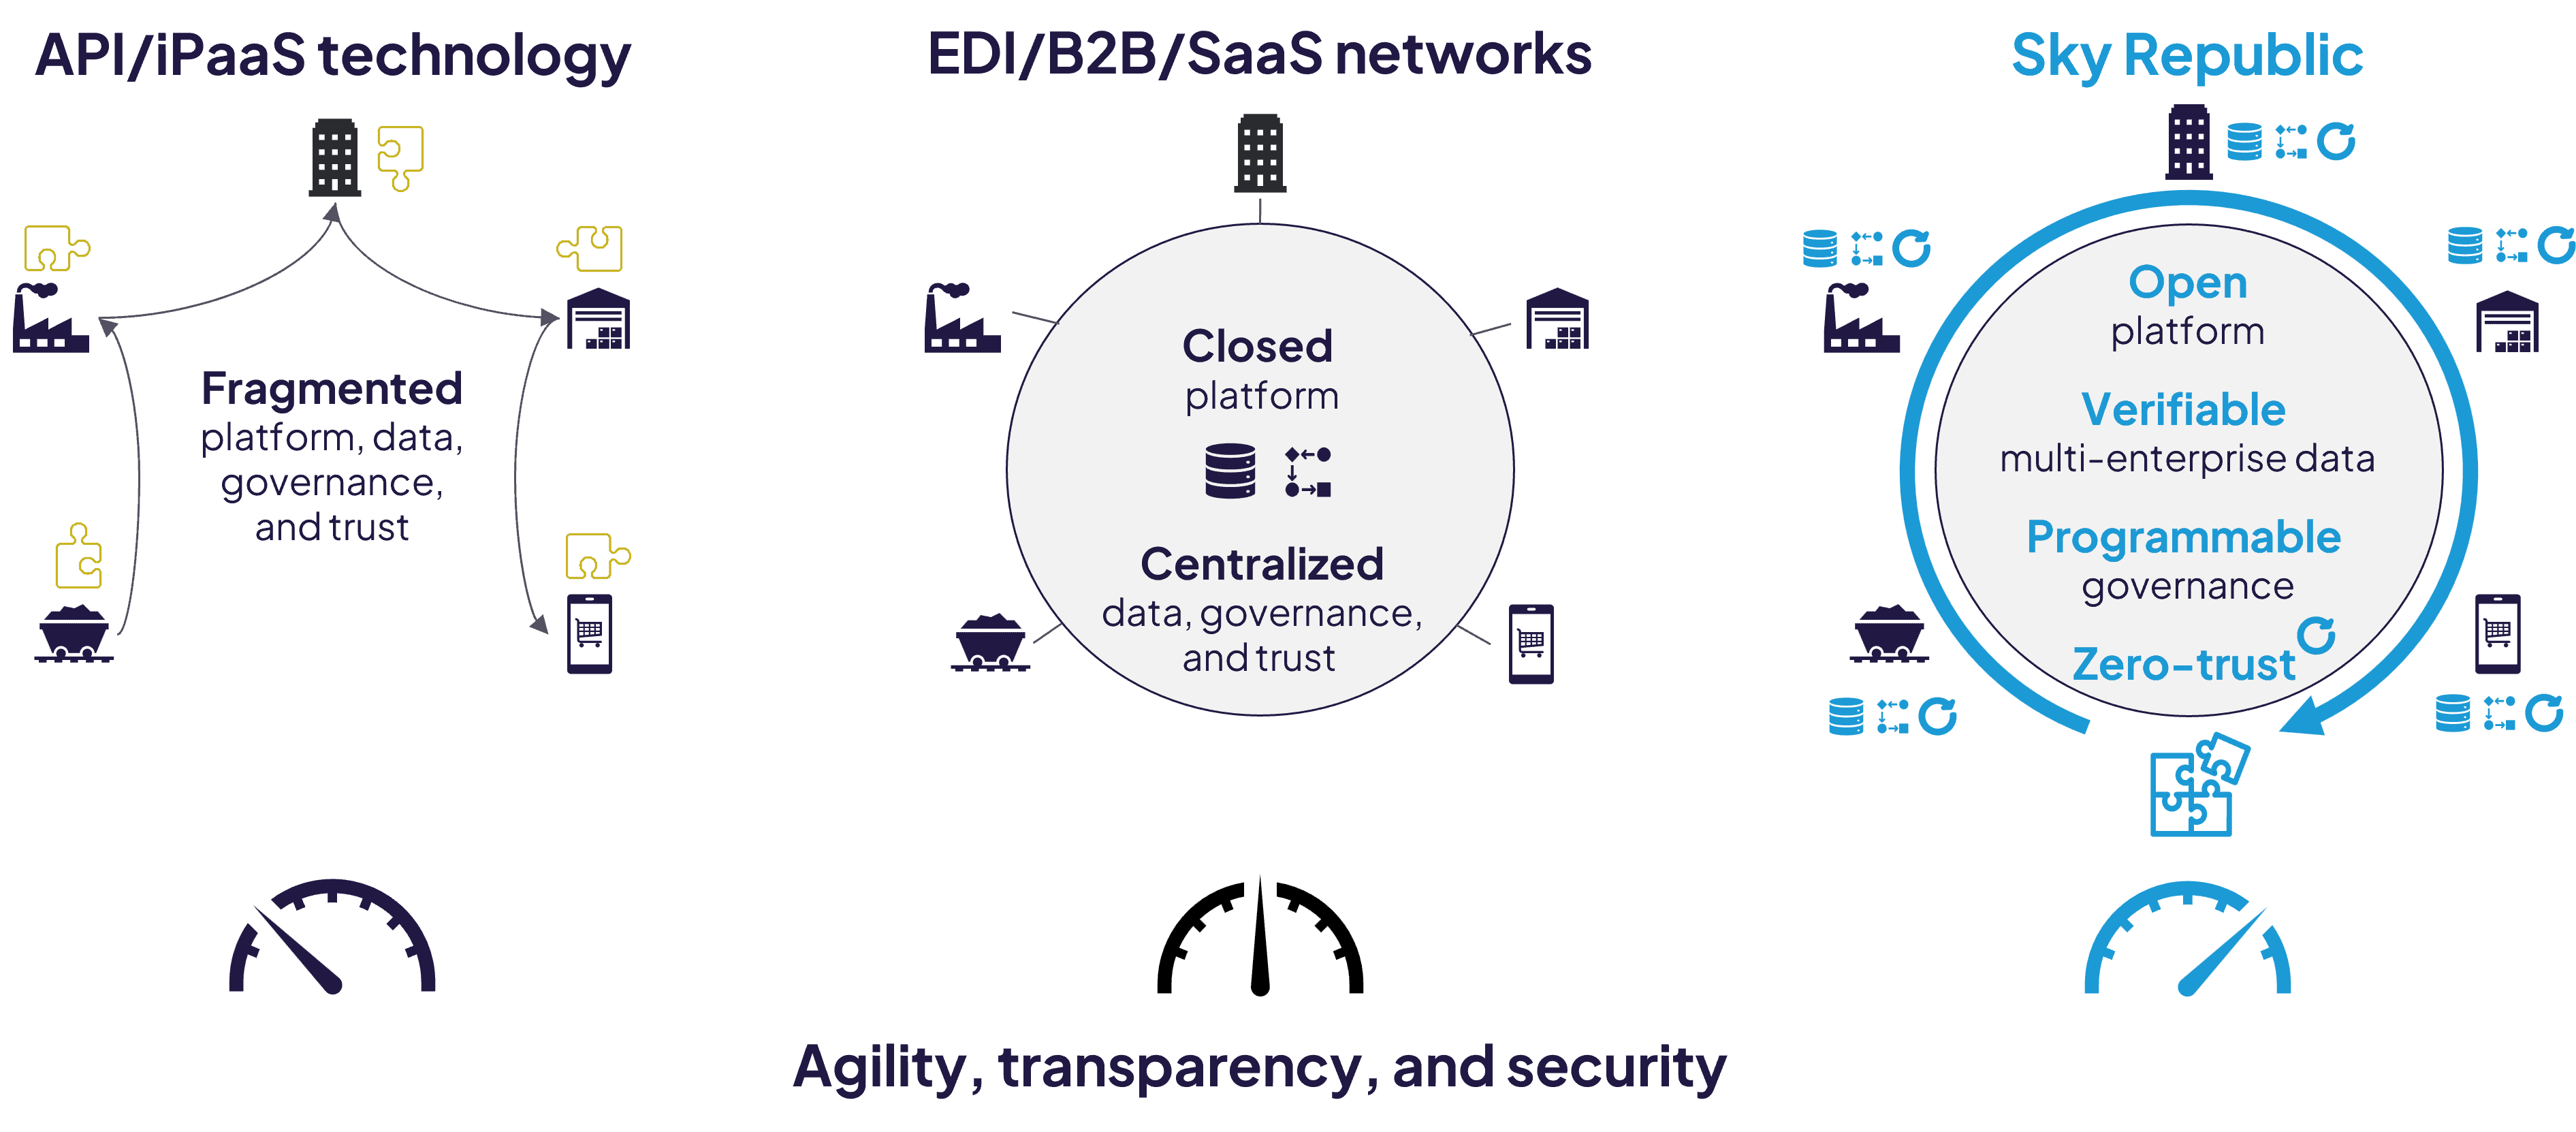 How Sky Republic zPaaS outperforms legacy platforms such as API, iPaaS, SaaS, B2B / EDI networks, and blockchain / Web3